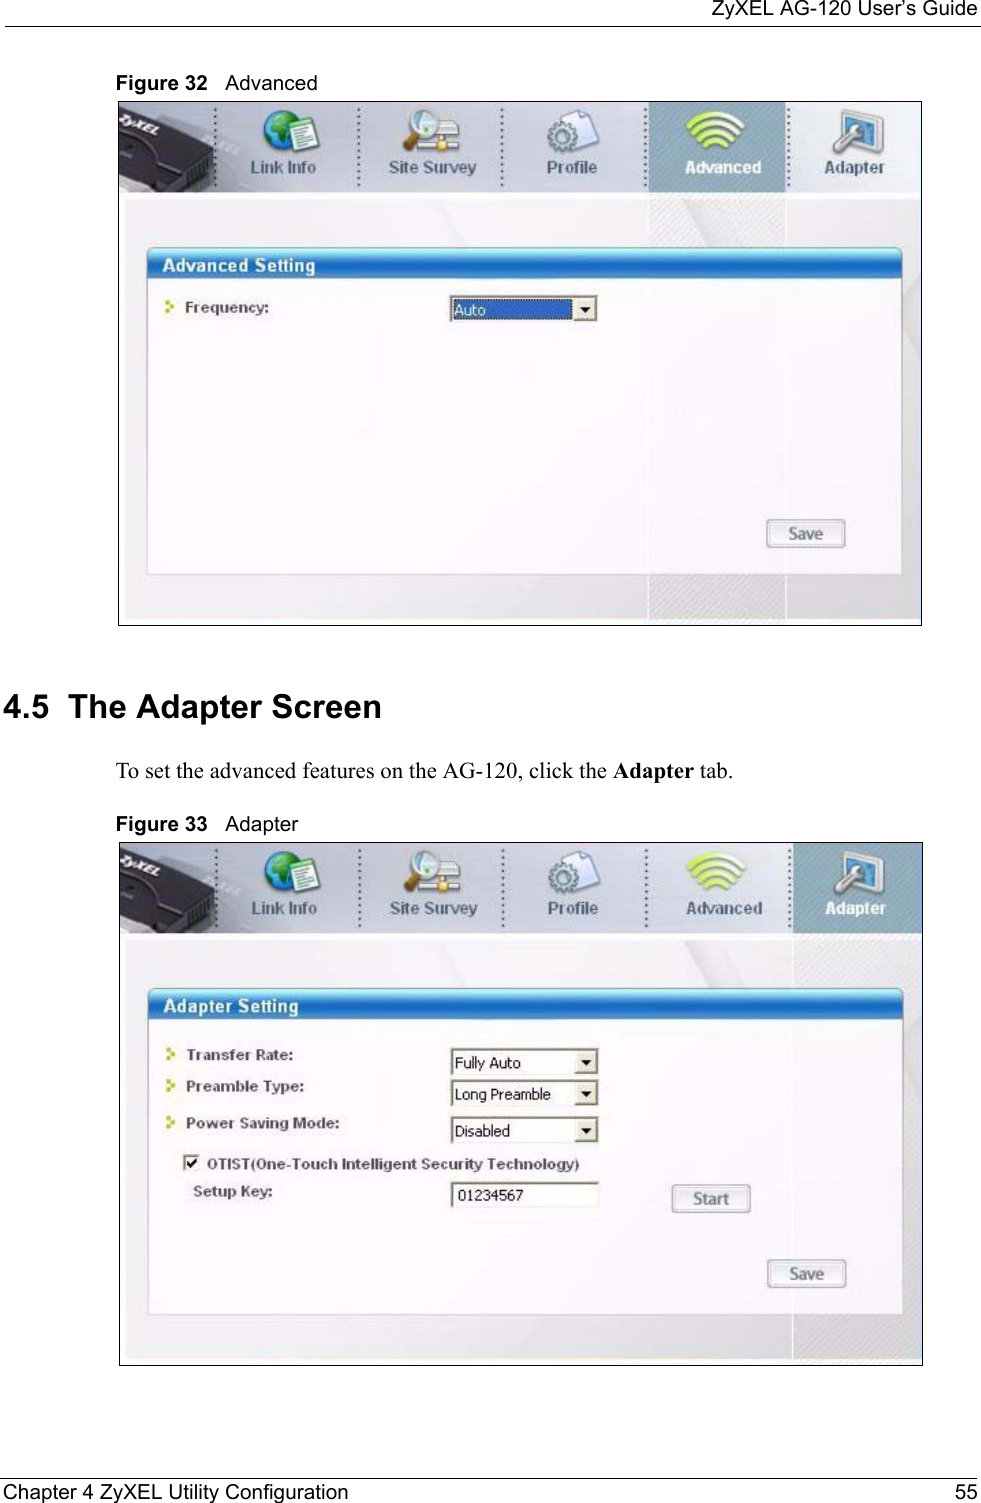 ZyXEL AG-120 User’s GuideChapter 4 ZyXEL Utility Configuration 55Figure 32   Advanced4.5  The Adapter Screen To set the advanced features on the AG-120, click the Adapter tab.Figure 33   Adapter 